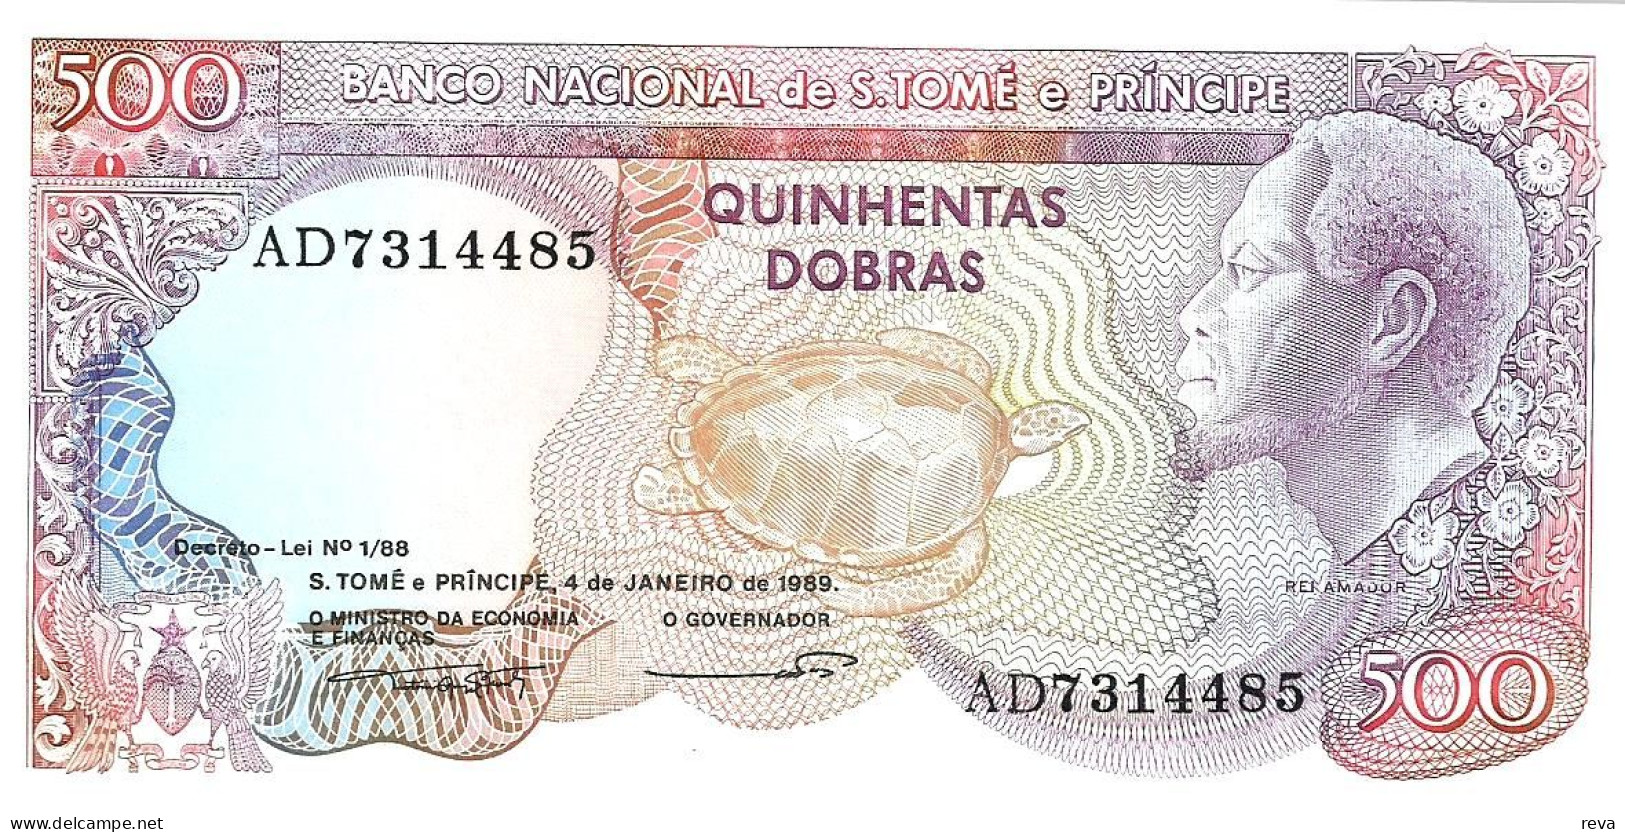 SAO TOME AND PRINCIPE 500 DOBRAS PURPLE MAN FRONT WATERFALL FLOWERS BACK DATED 04-01-1989 UNC P.? READ DESCRIPTION - Sao Tome And Principe